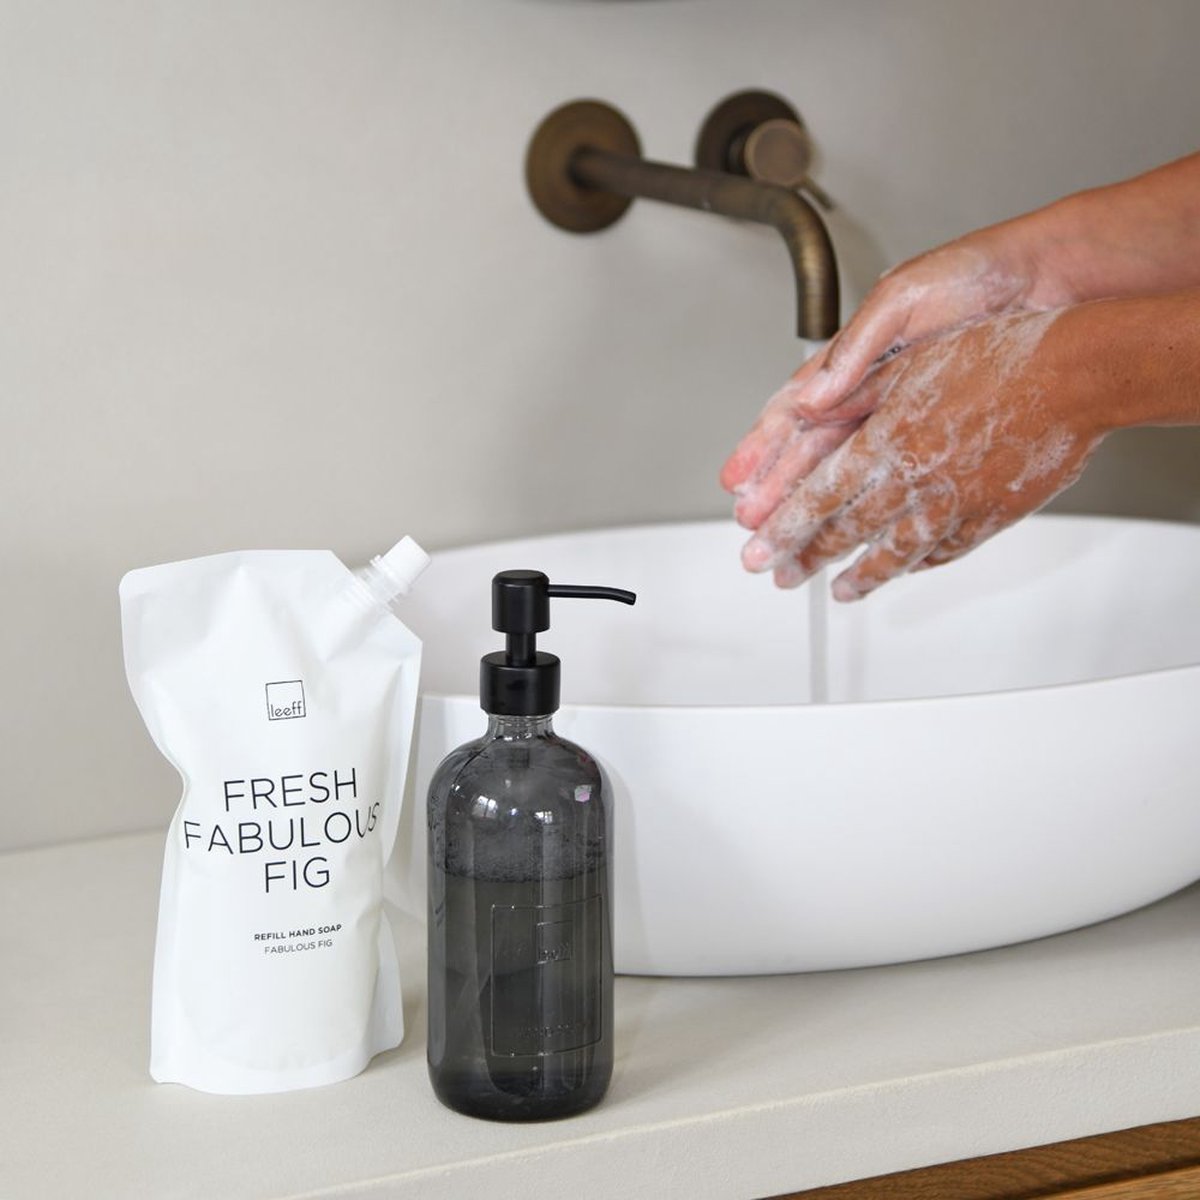 Leeff Giftbox - Fabulous Fig Hand Soap + refill